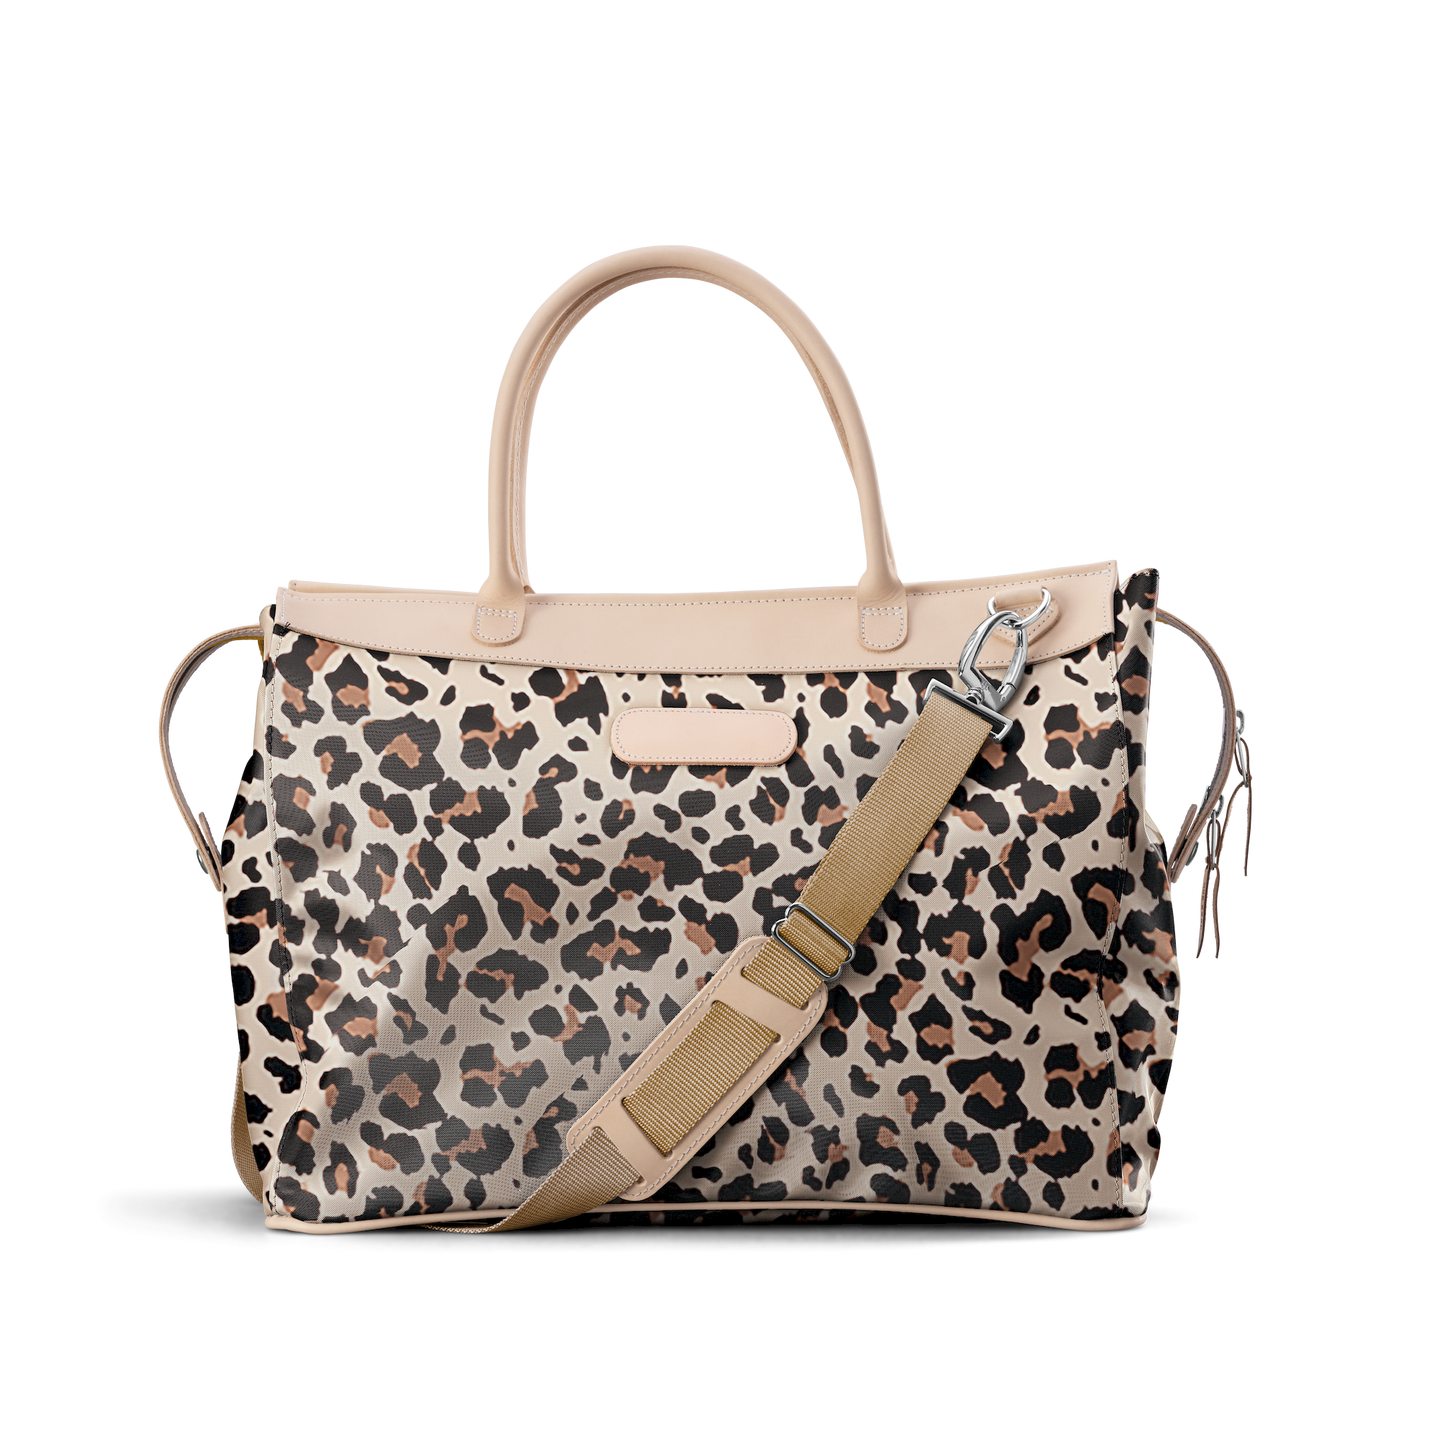 Burleson Bag - Leopard Coated Canvas Front Angle in Color 'Leopard Coated Canvas'